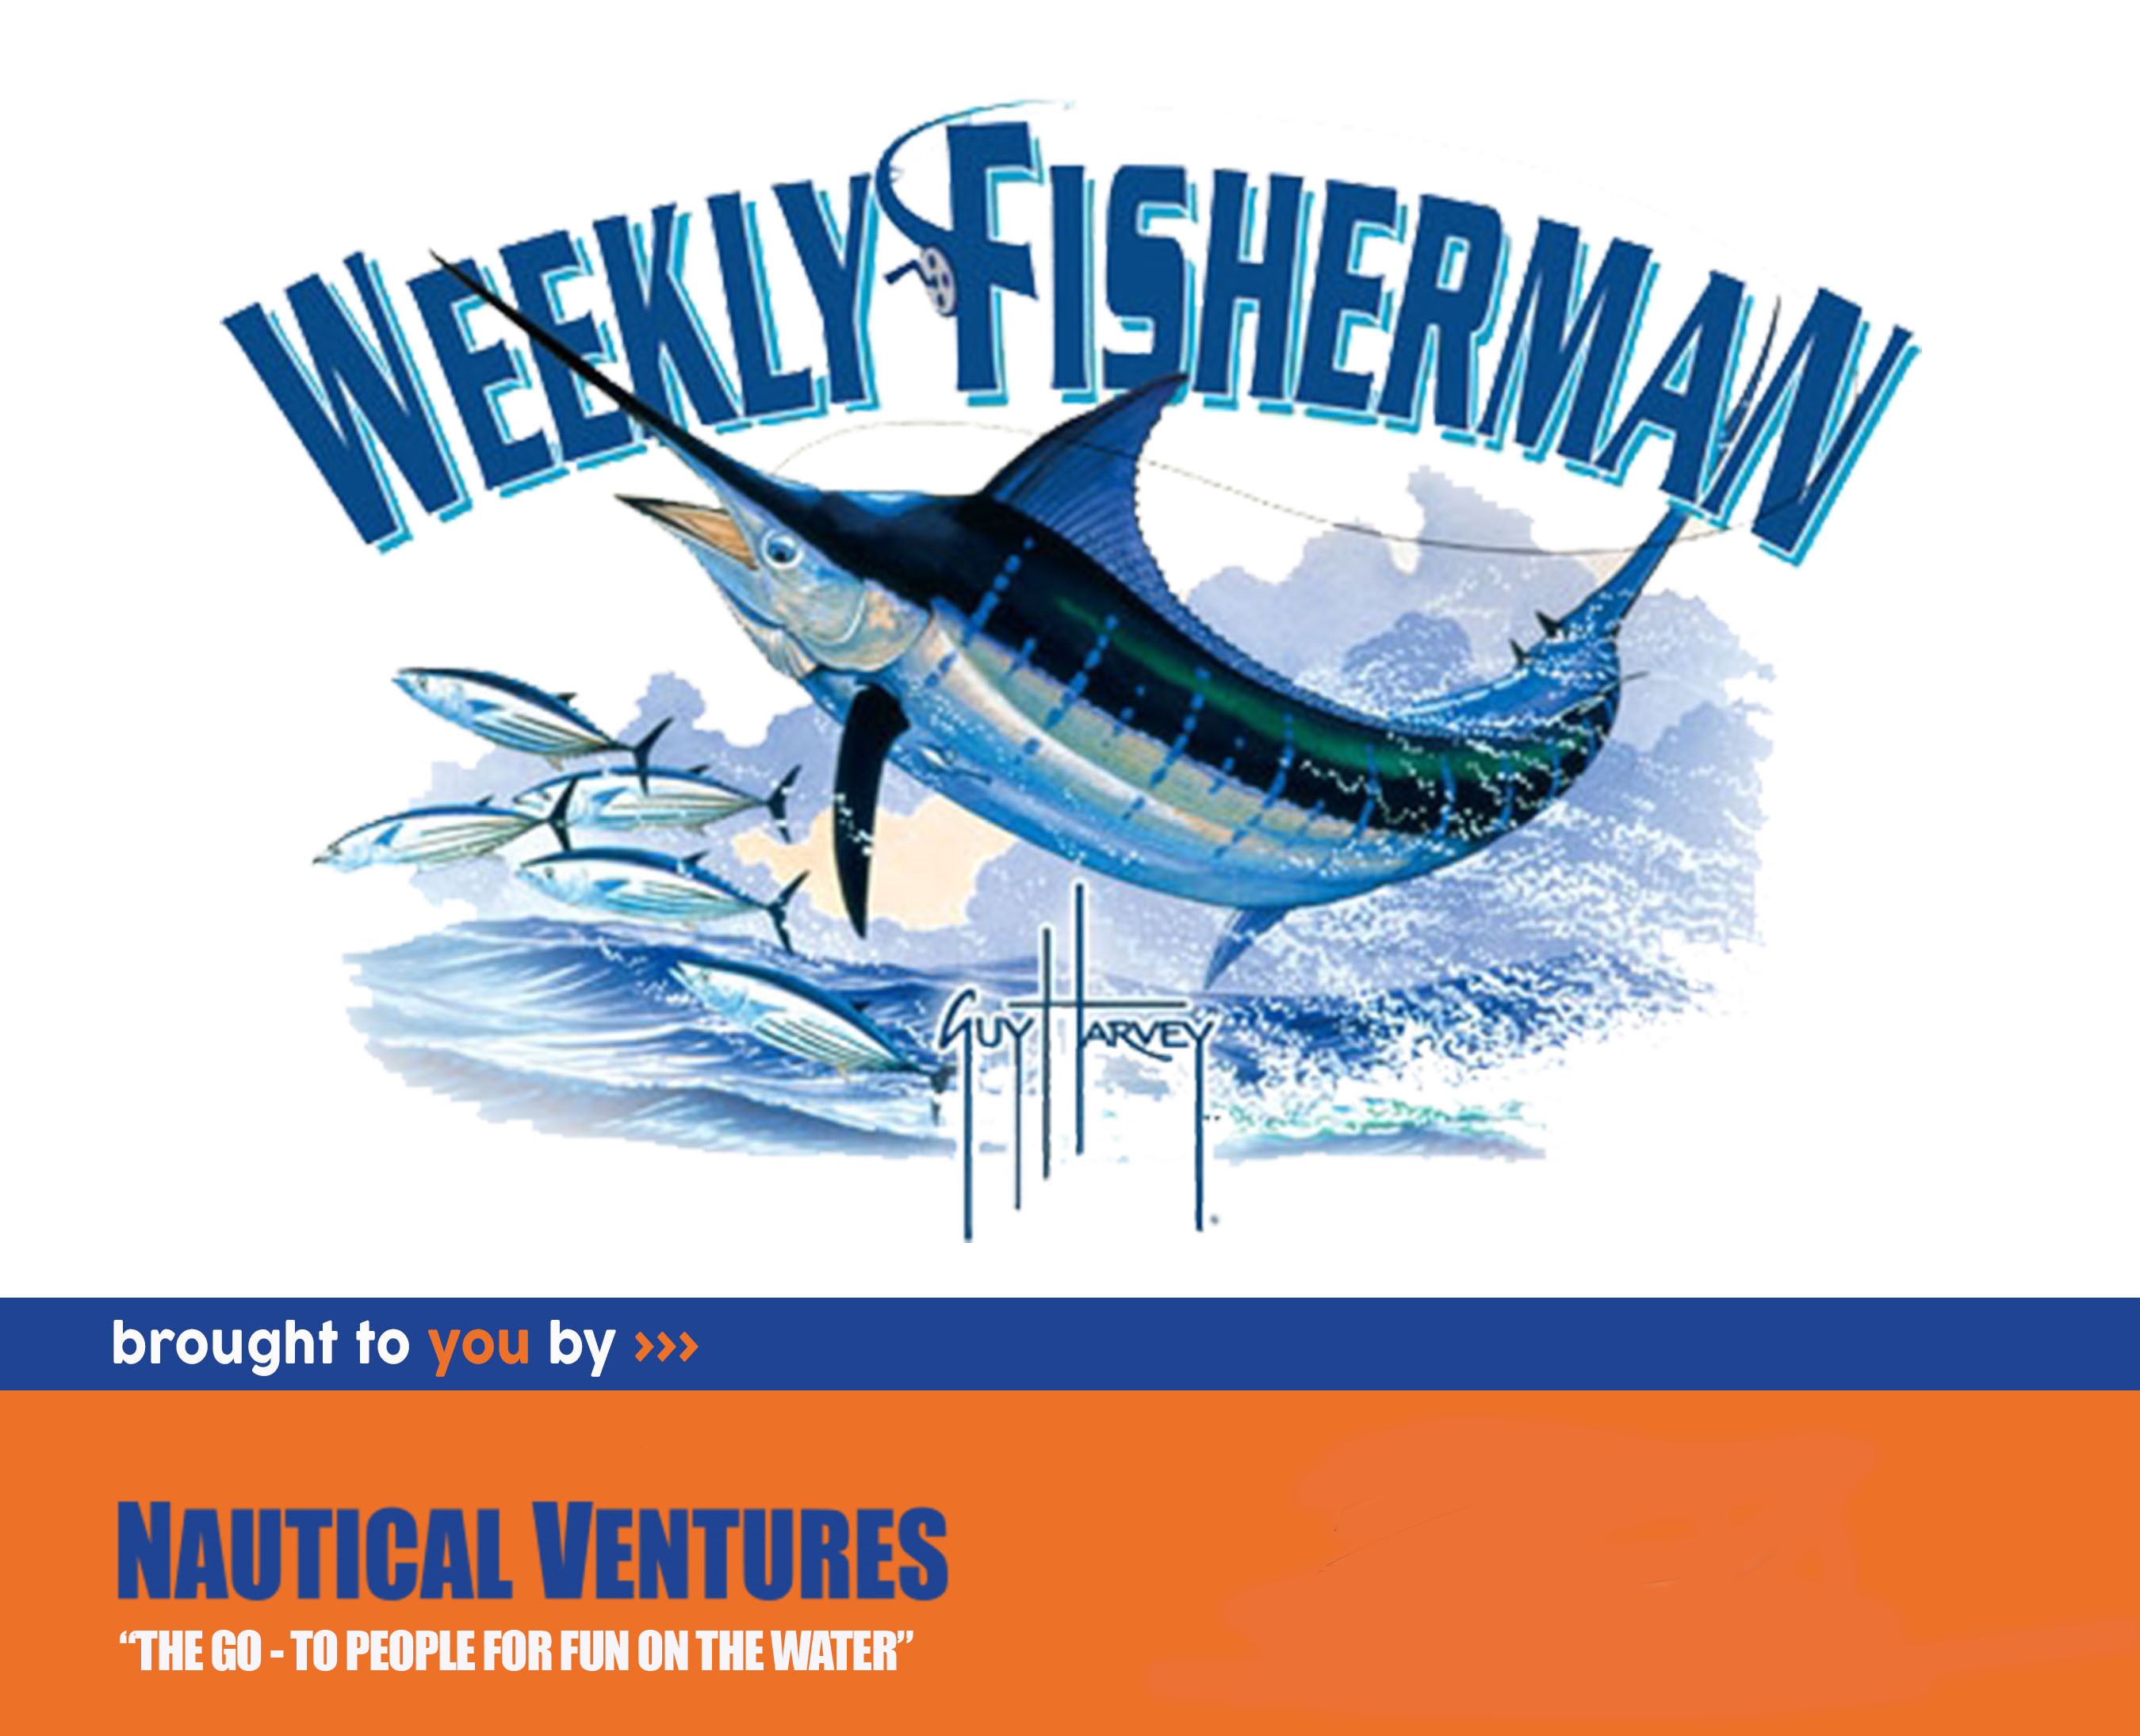 The Weekly Fisherman Show Podcast 07-23-16